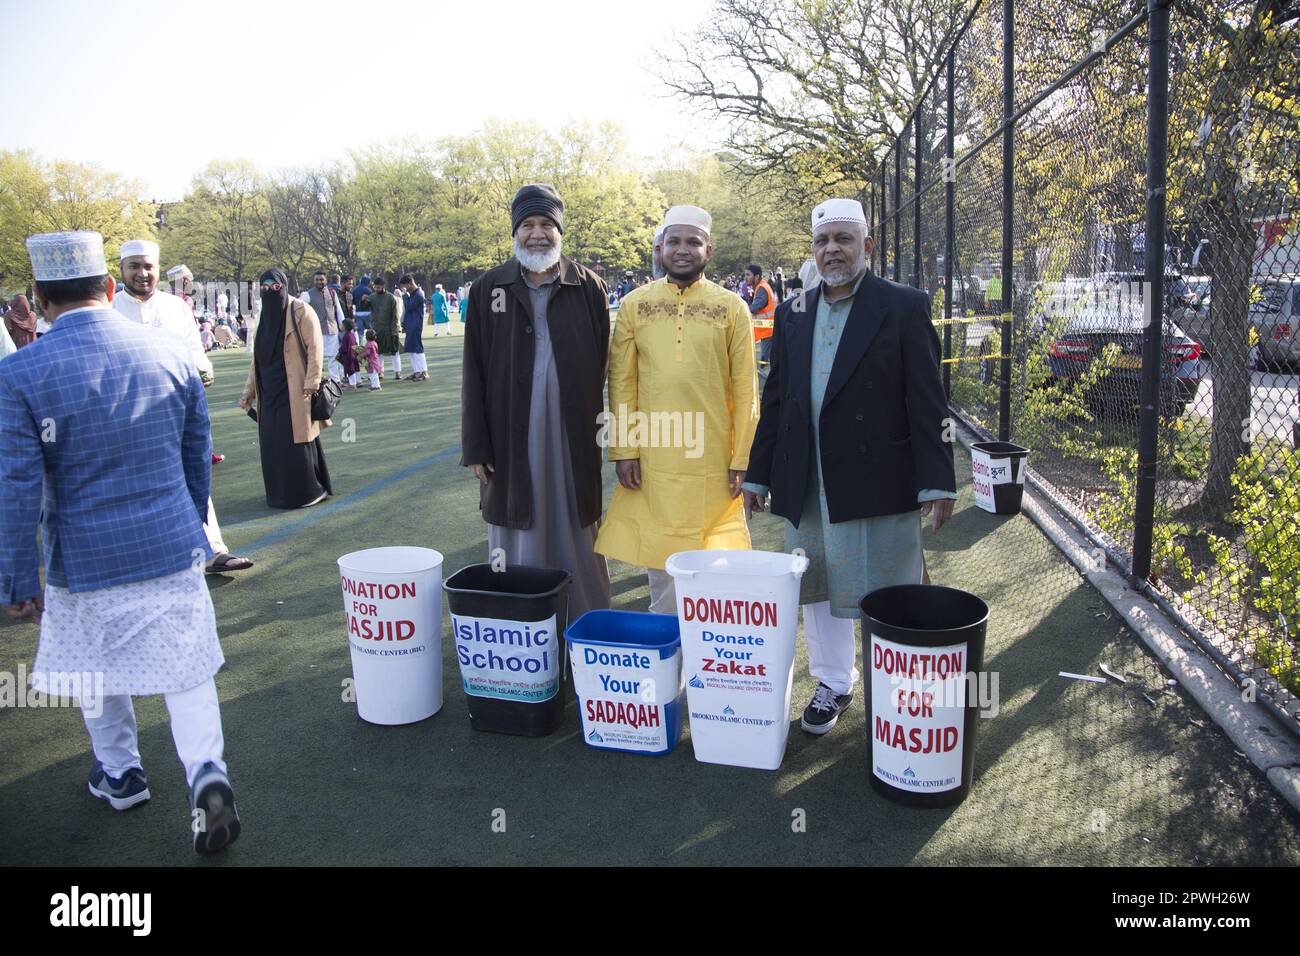 Muslims from various mosques in Brooklyn attend a prayer service on Eid at the end of Ramadan in Prospect Park, Brooklyn, New York.  Zakat is a charity God obligates Muslims to pay yearly on their money and property. Its payment is made to the poor, vulnerable, and deserving as their divinely established right. Stock Photo